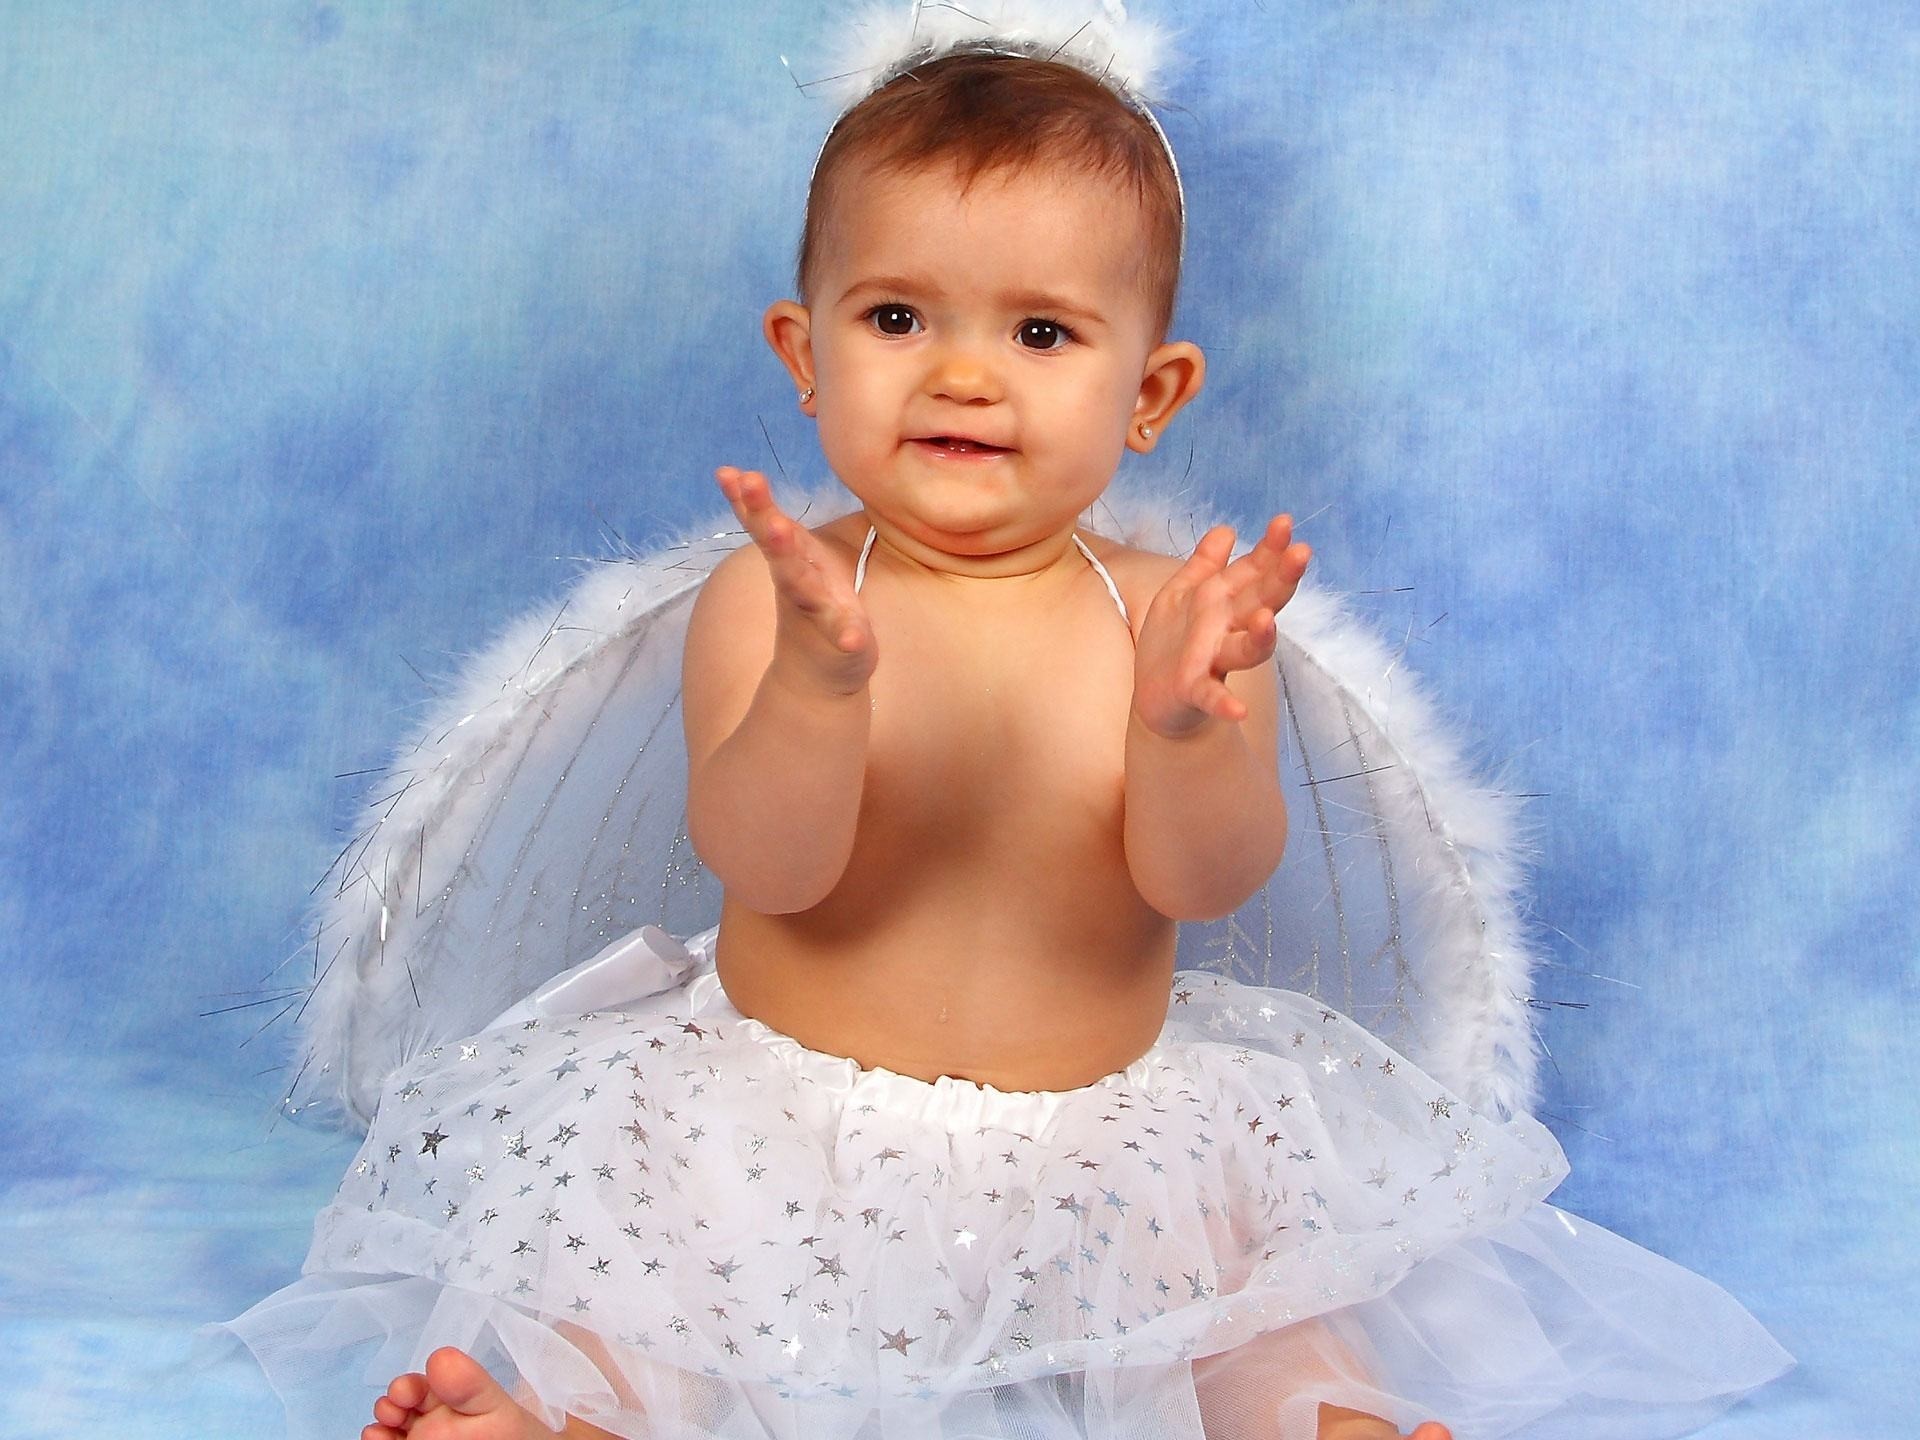 1920x1440 Wallpapers Backgrounds - 12 cute angel baby girl